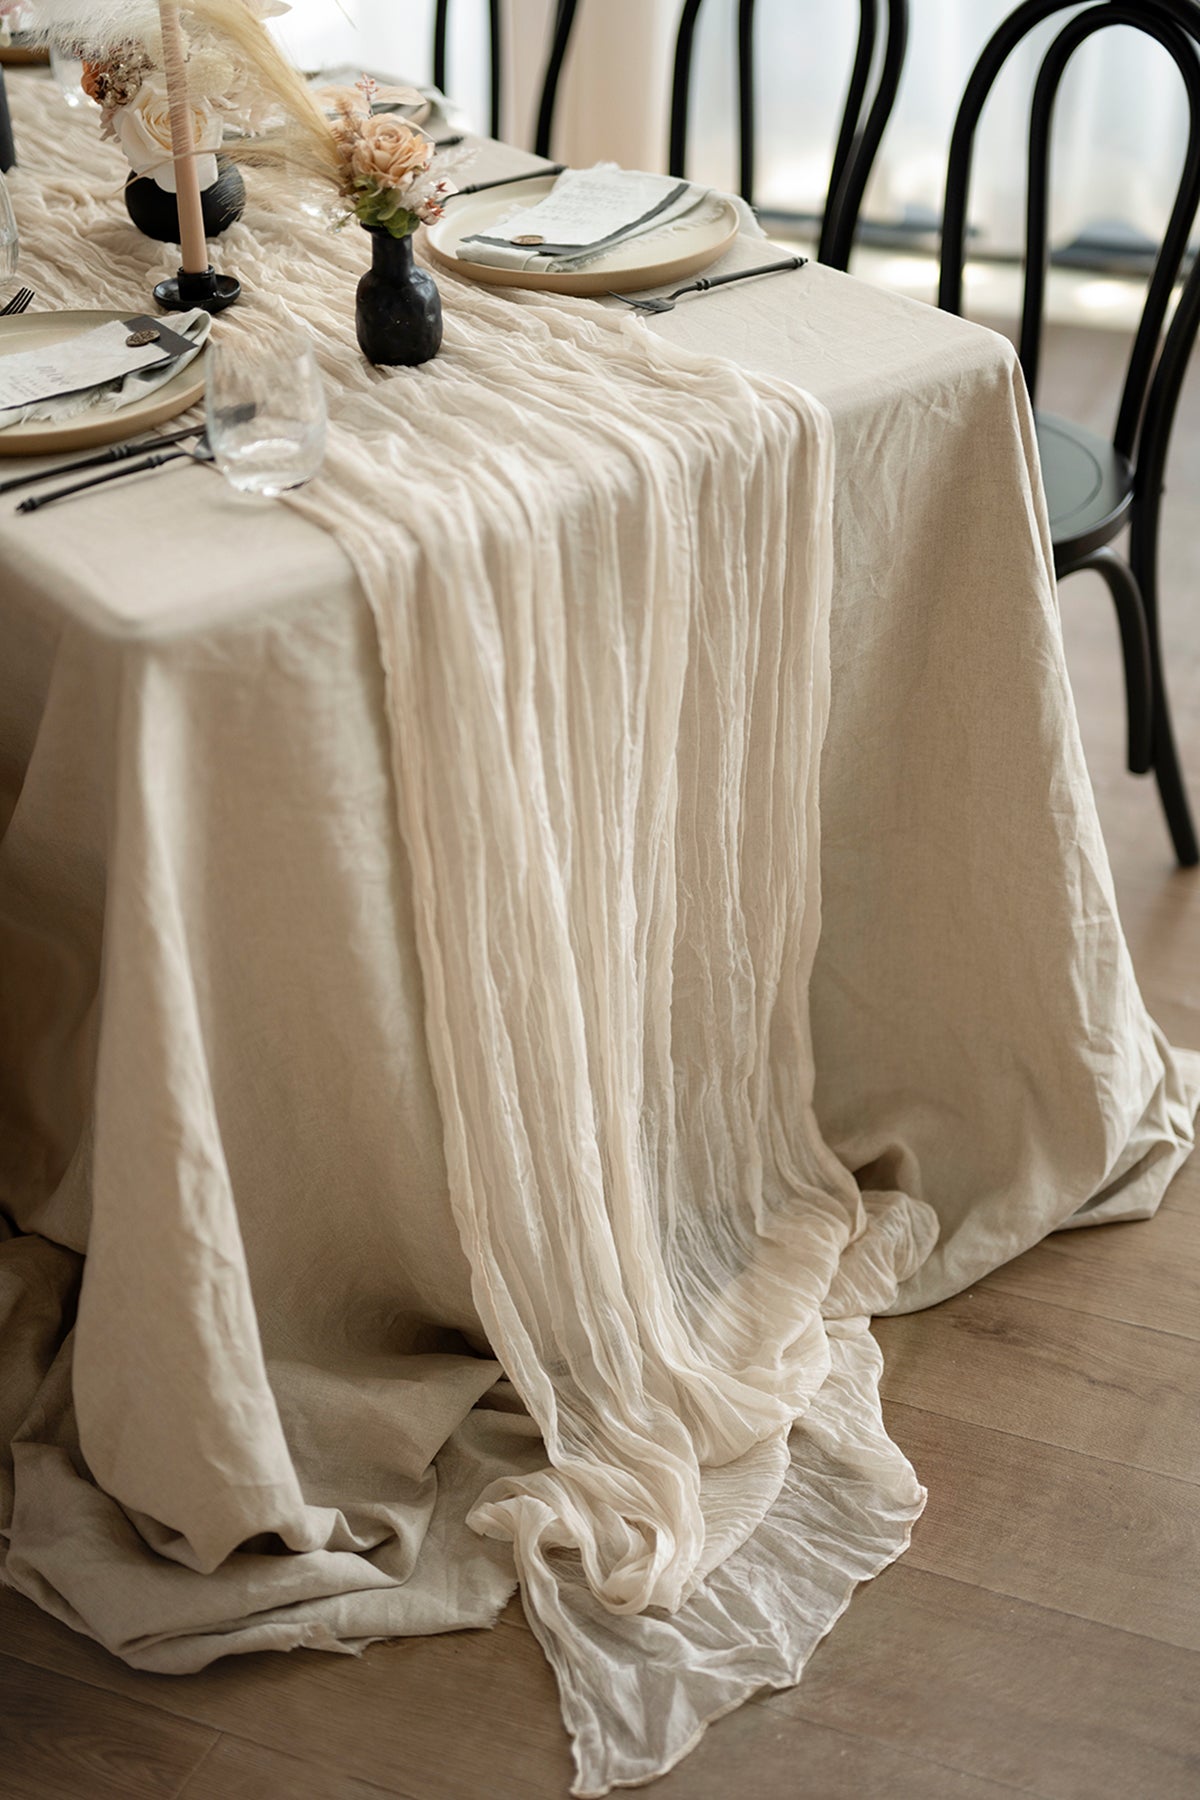 Table Linens in White & Beige – Ling's Moment